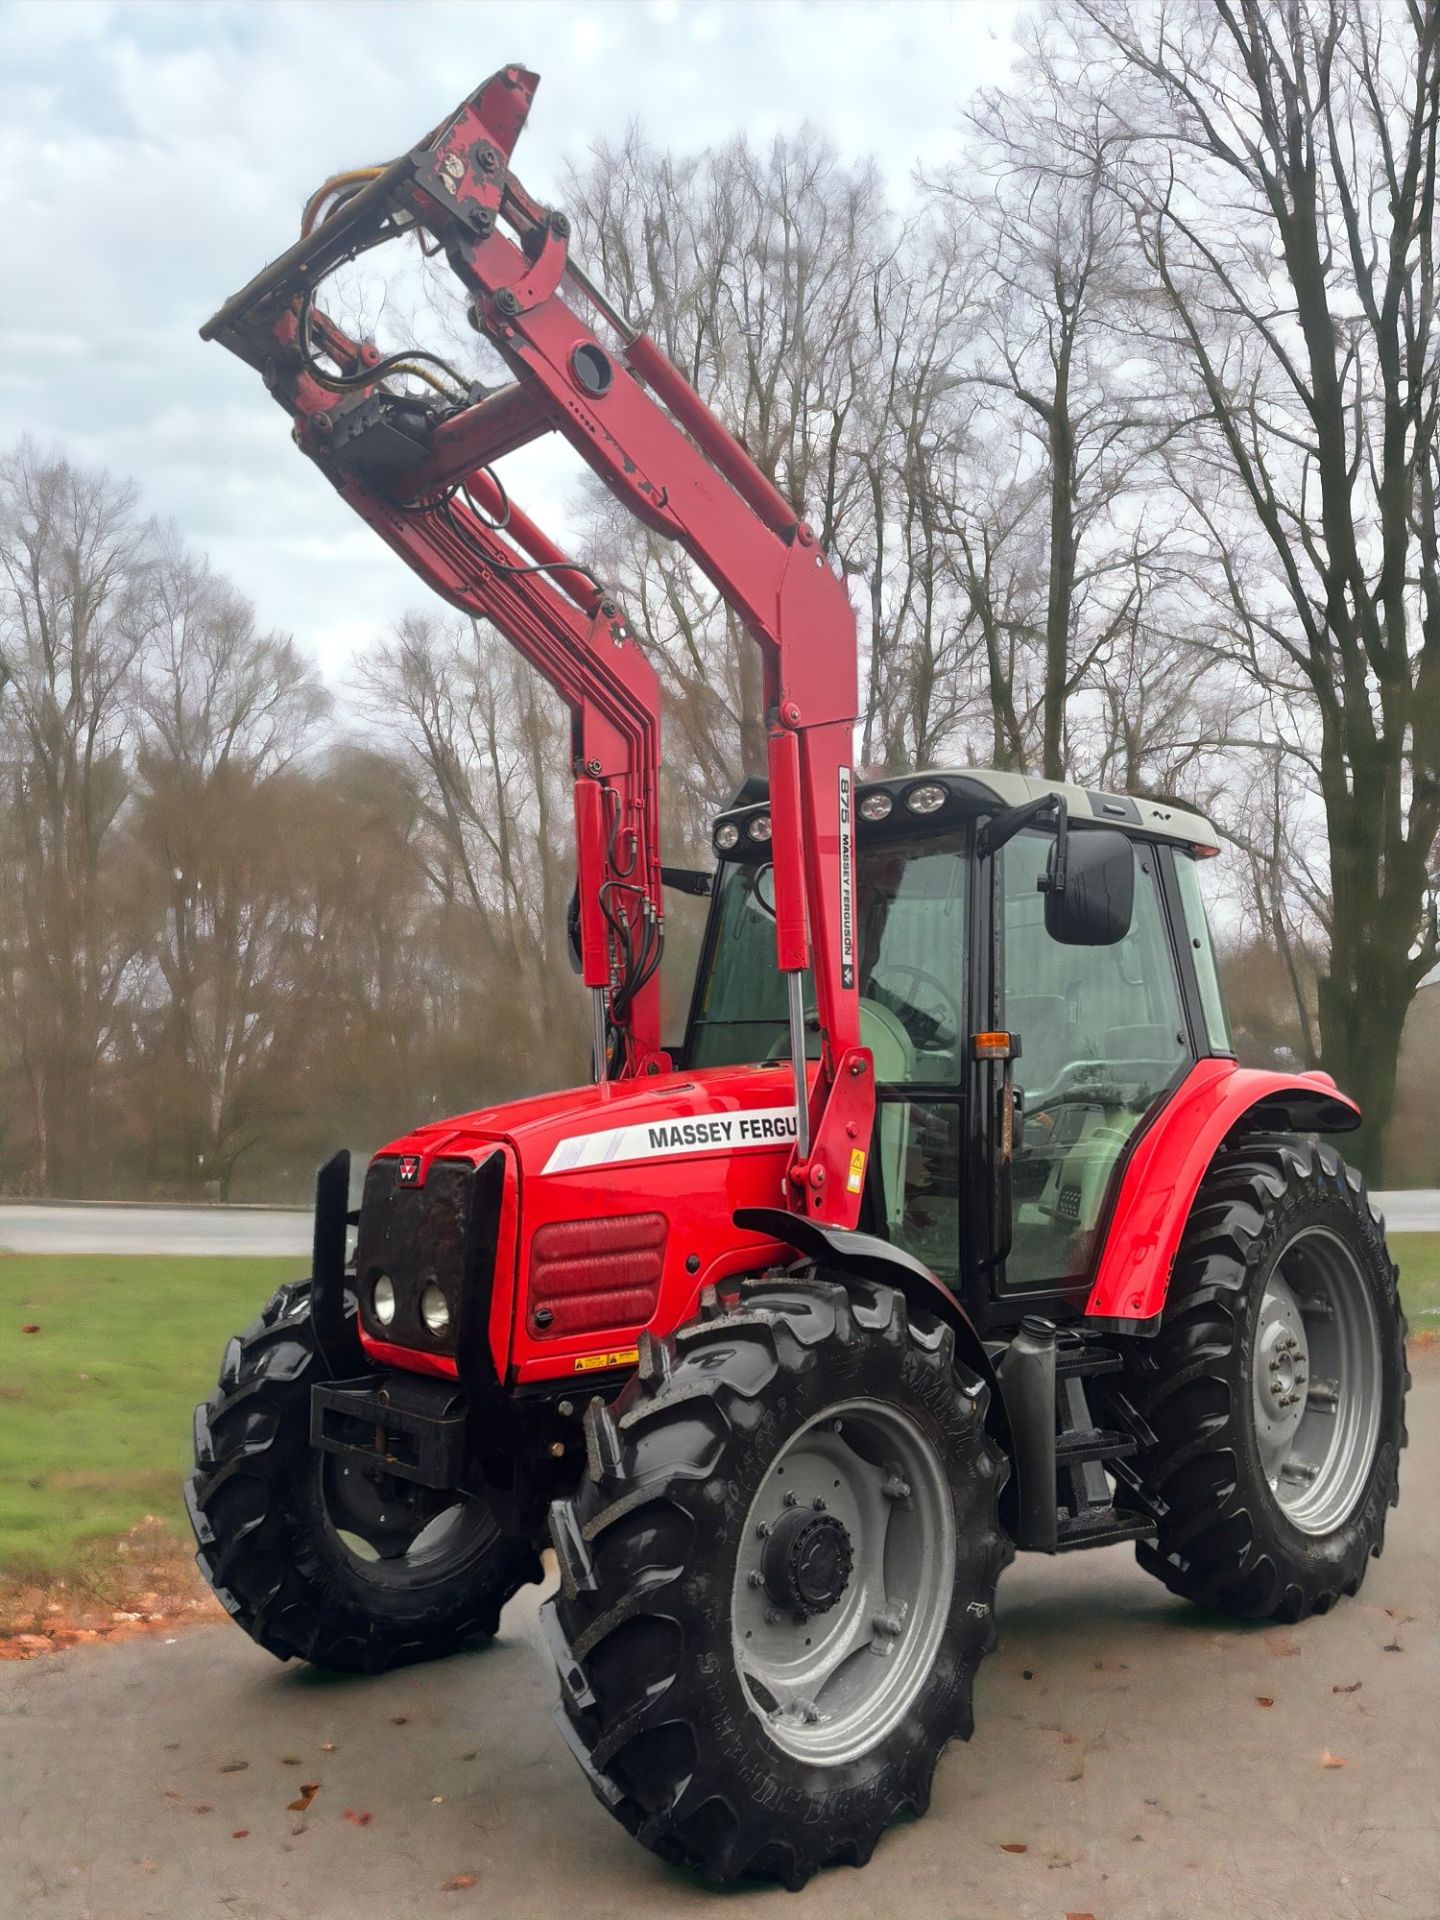 2005 MASSEY FERGUSON 6455 LOADER TRACTOR - POWERFUL PERFORMANCE, VERSATILE FEATURES! - Image 2 of 20